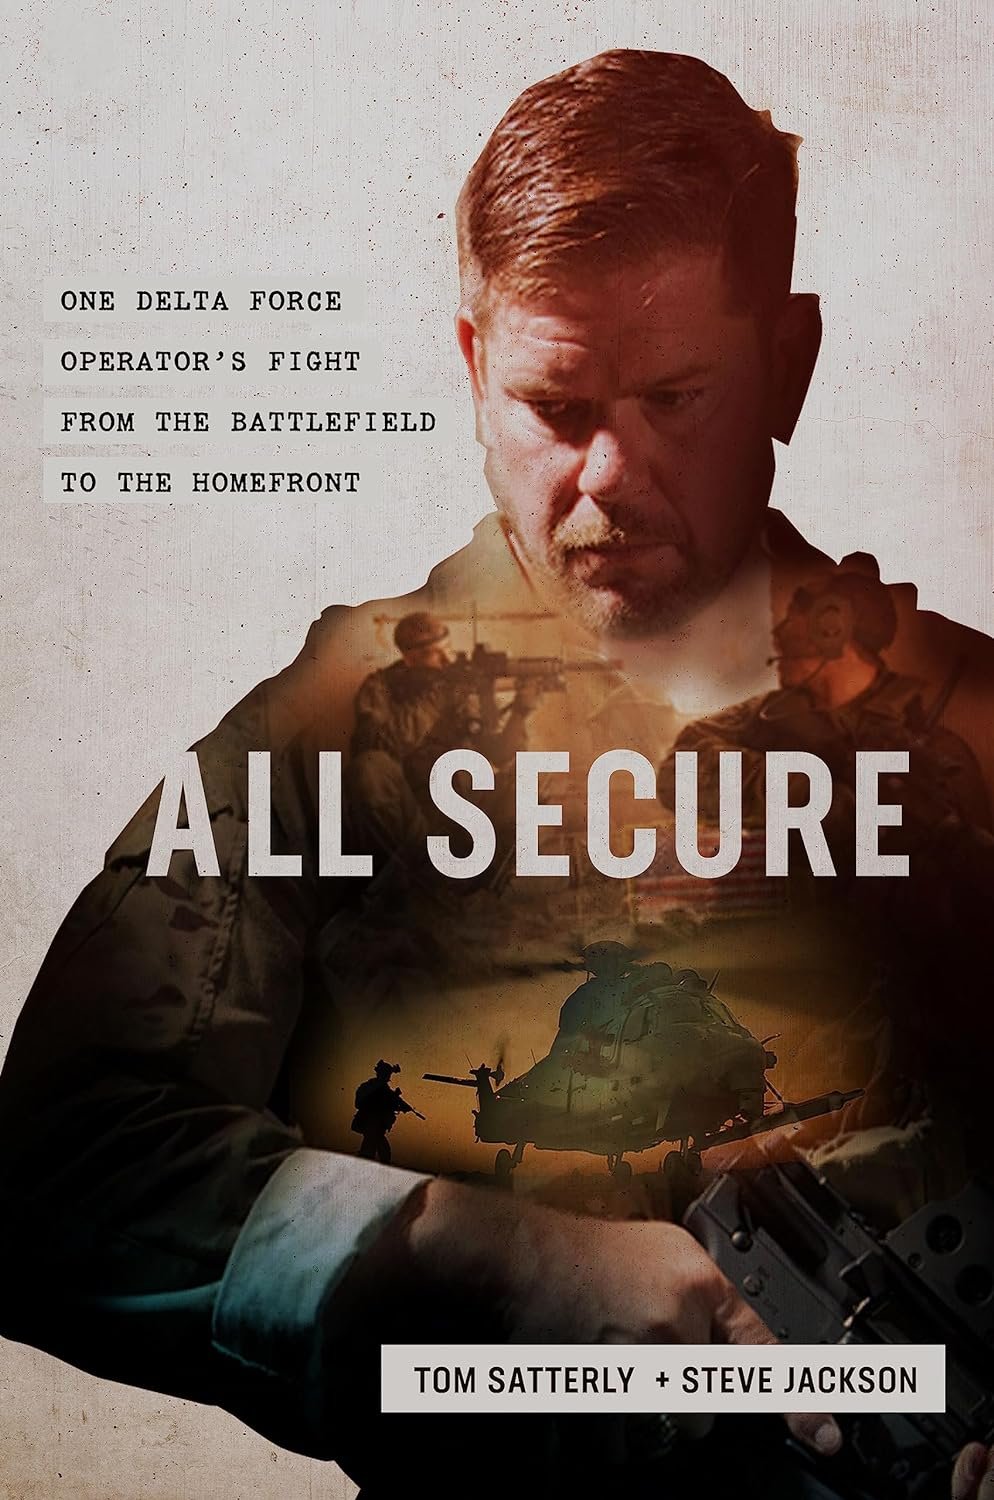 All Secure: A Special Operations Soldier's Fight to Survive on the Battlefield and the Homefront